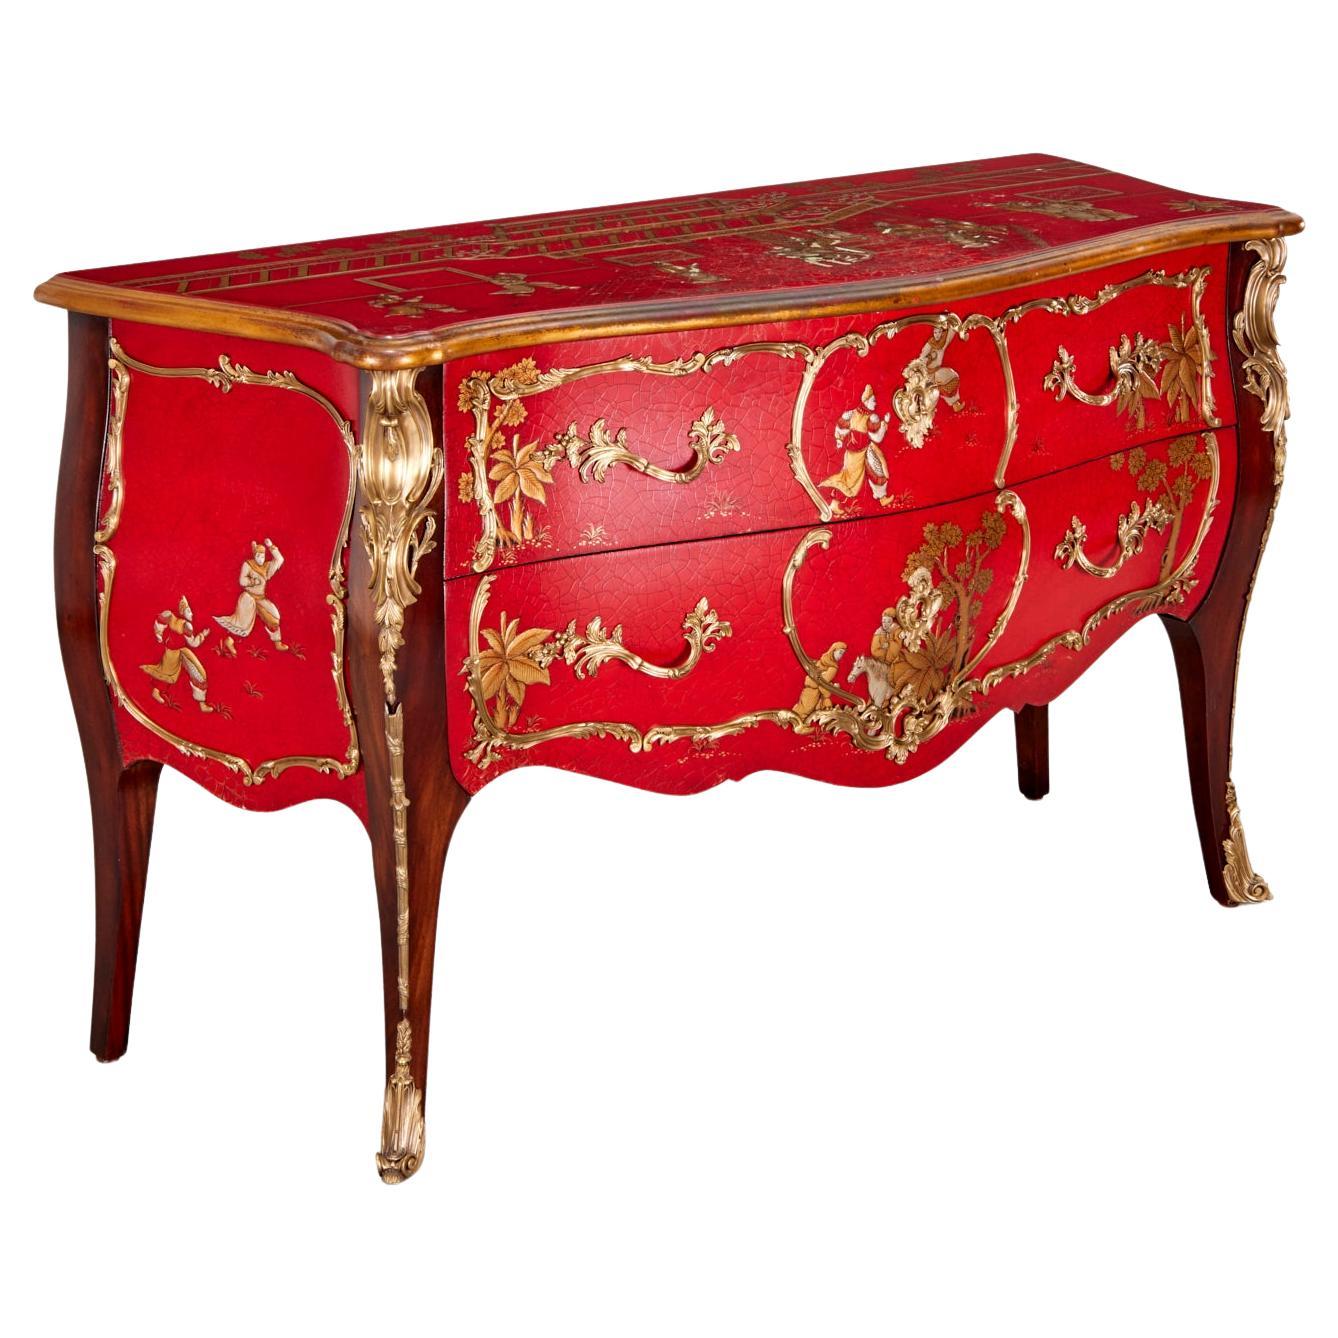 21st C.Theodore Alexander, 'The Opulent East' Red Lacquer Serpentine Bombe Chest